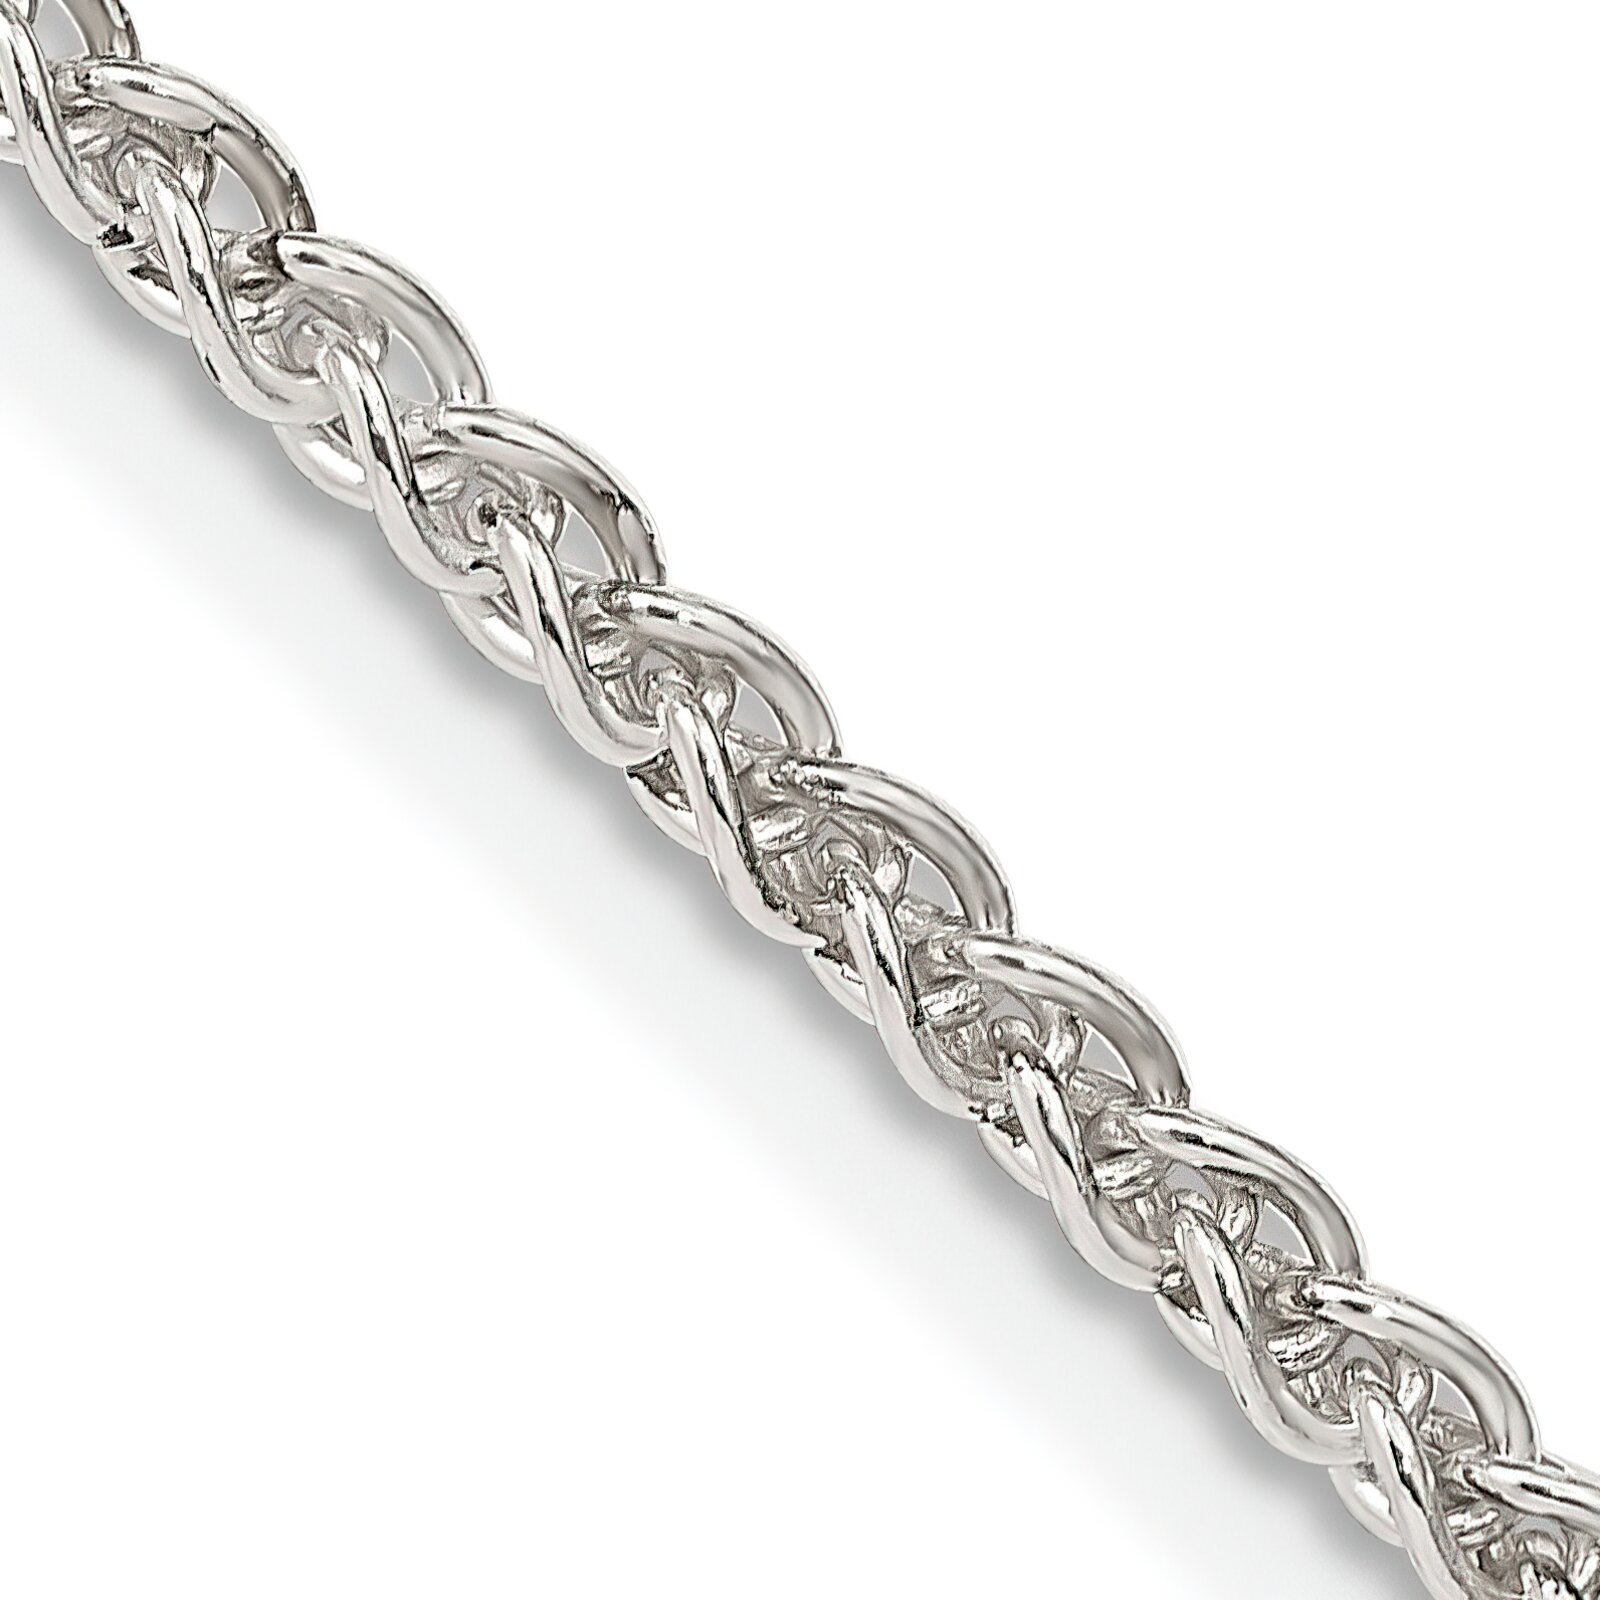 Findingking Sterling Silver Round Spiga Chain 24"